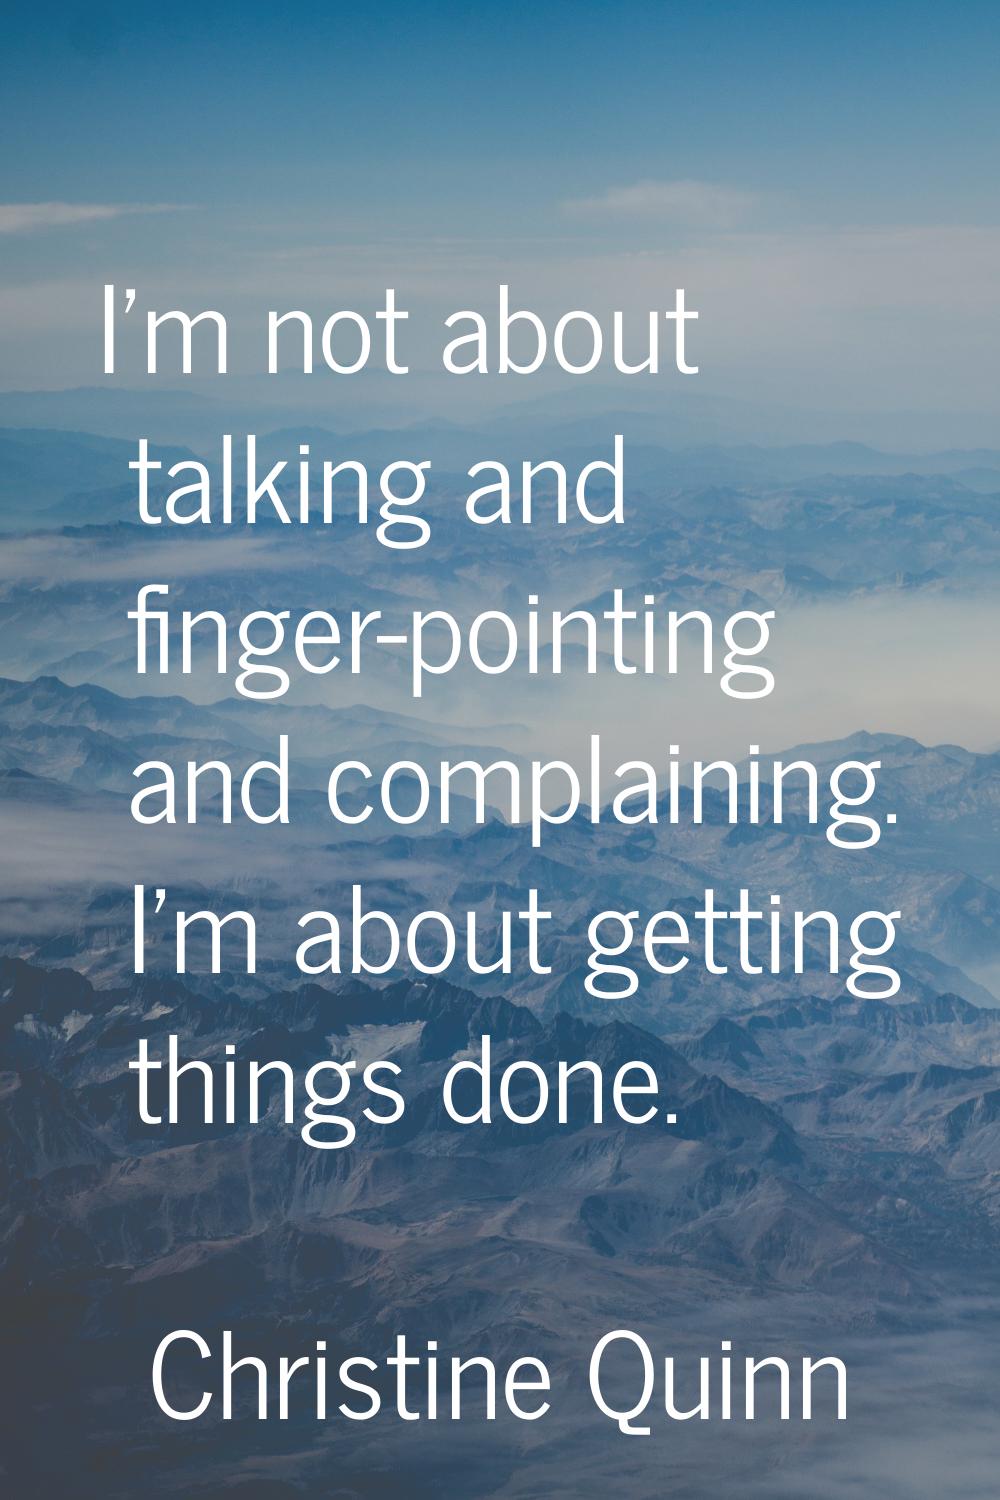 I'm not about talking and finger-pointing and complaining. I'm about getting things done.